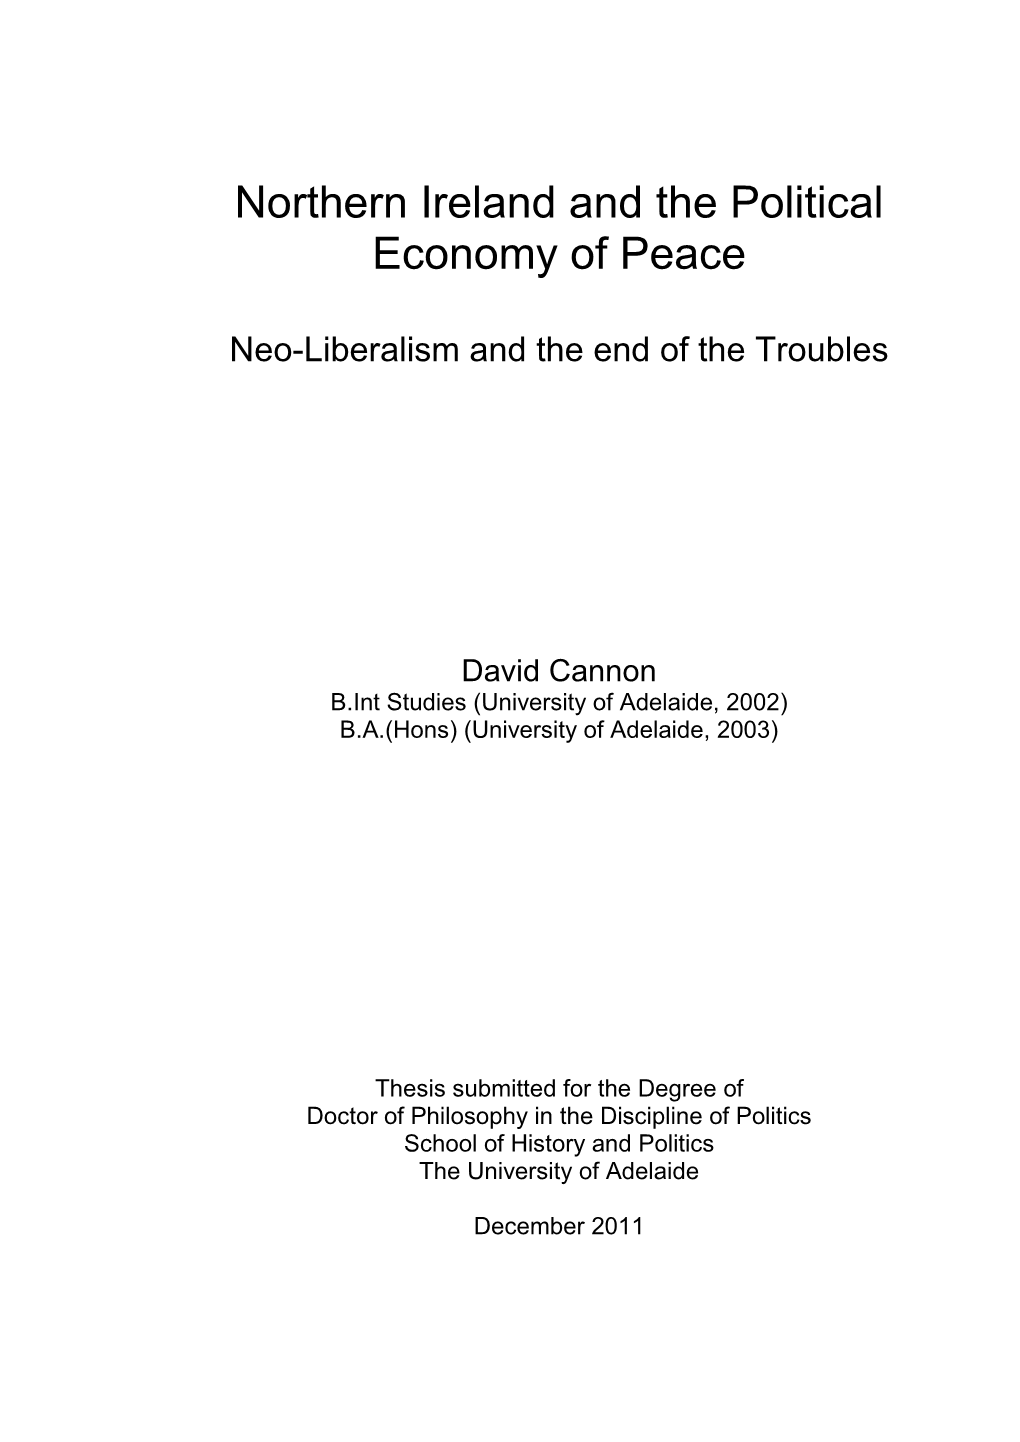 Northern Ireland and the Political Economy of Peace